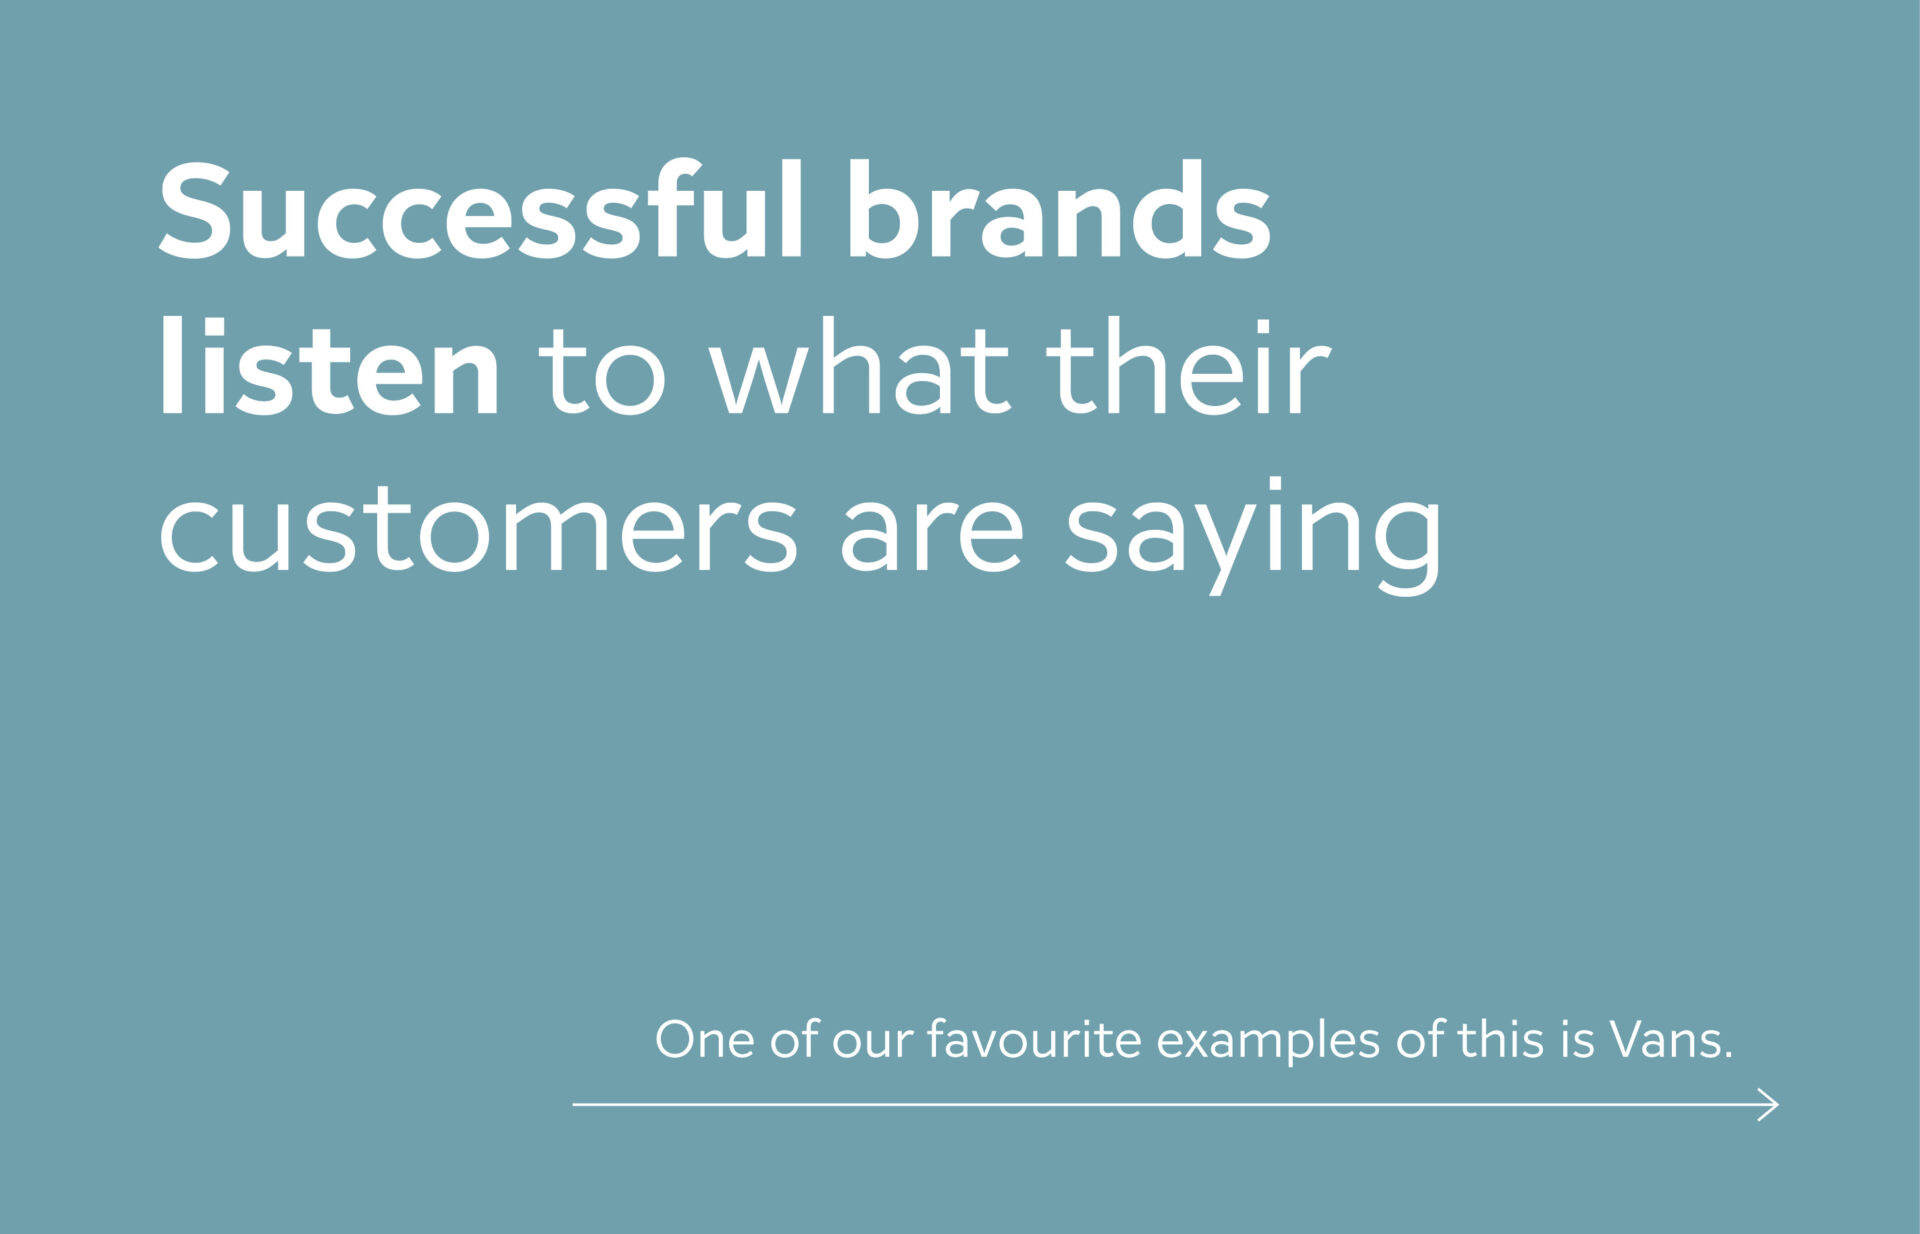 Successful brands listen to what their customers are saying